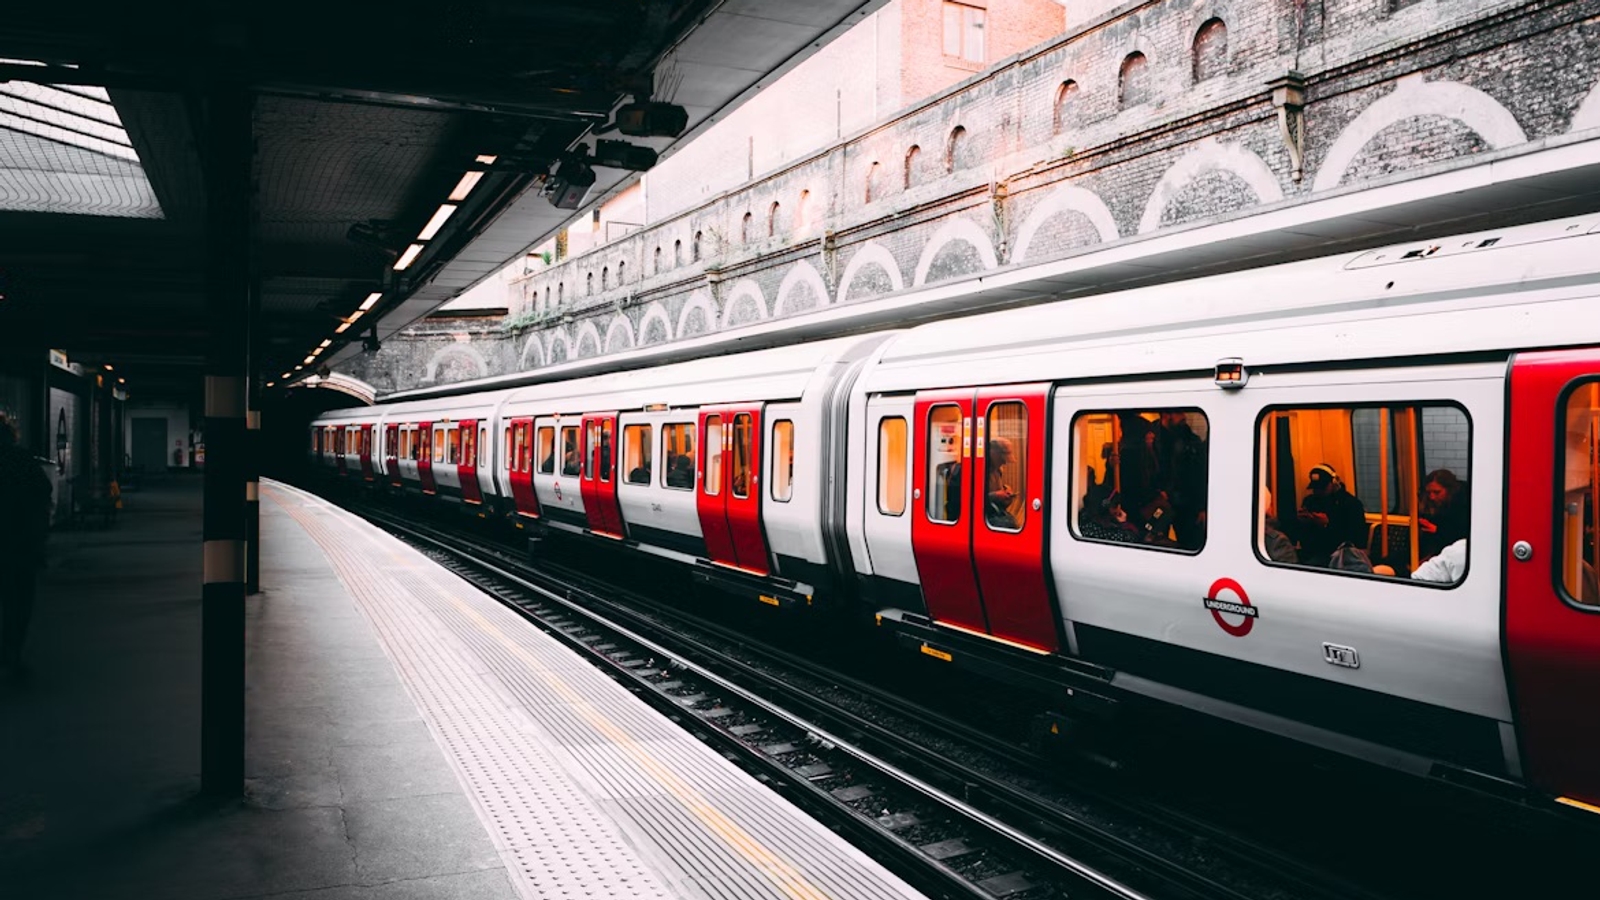 A London underground train pulled into a station